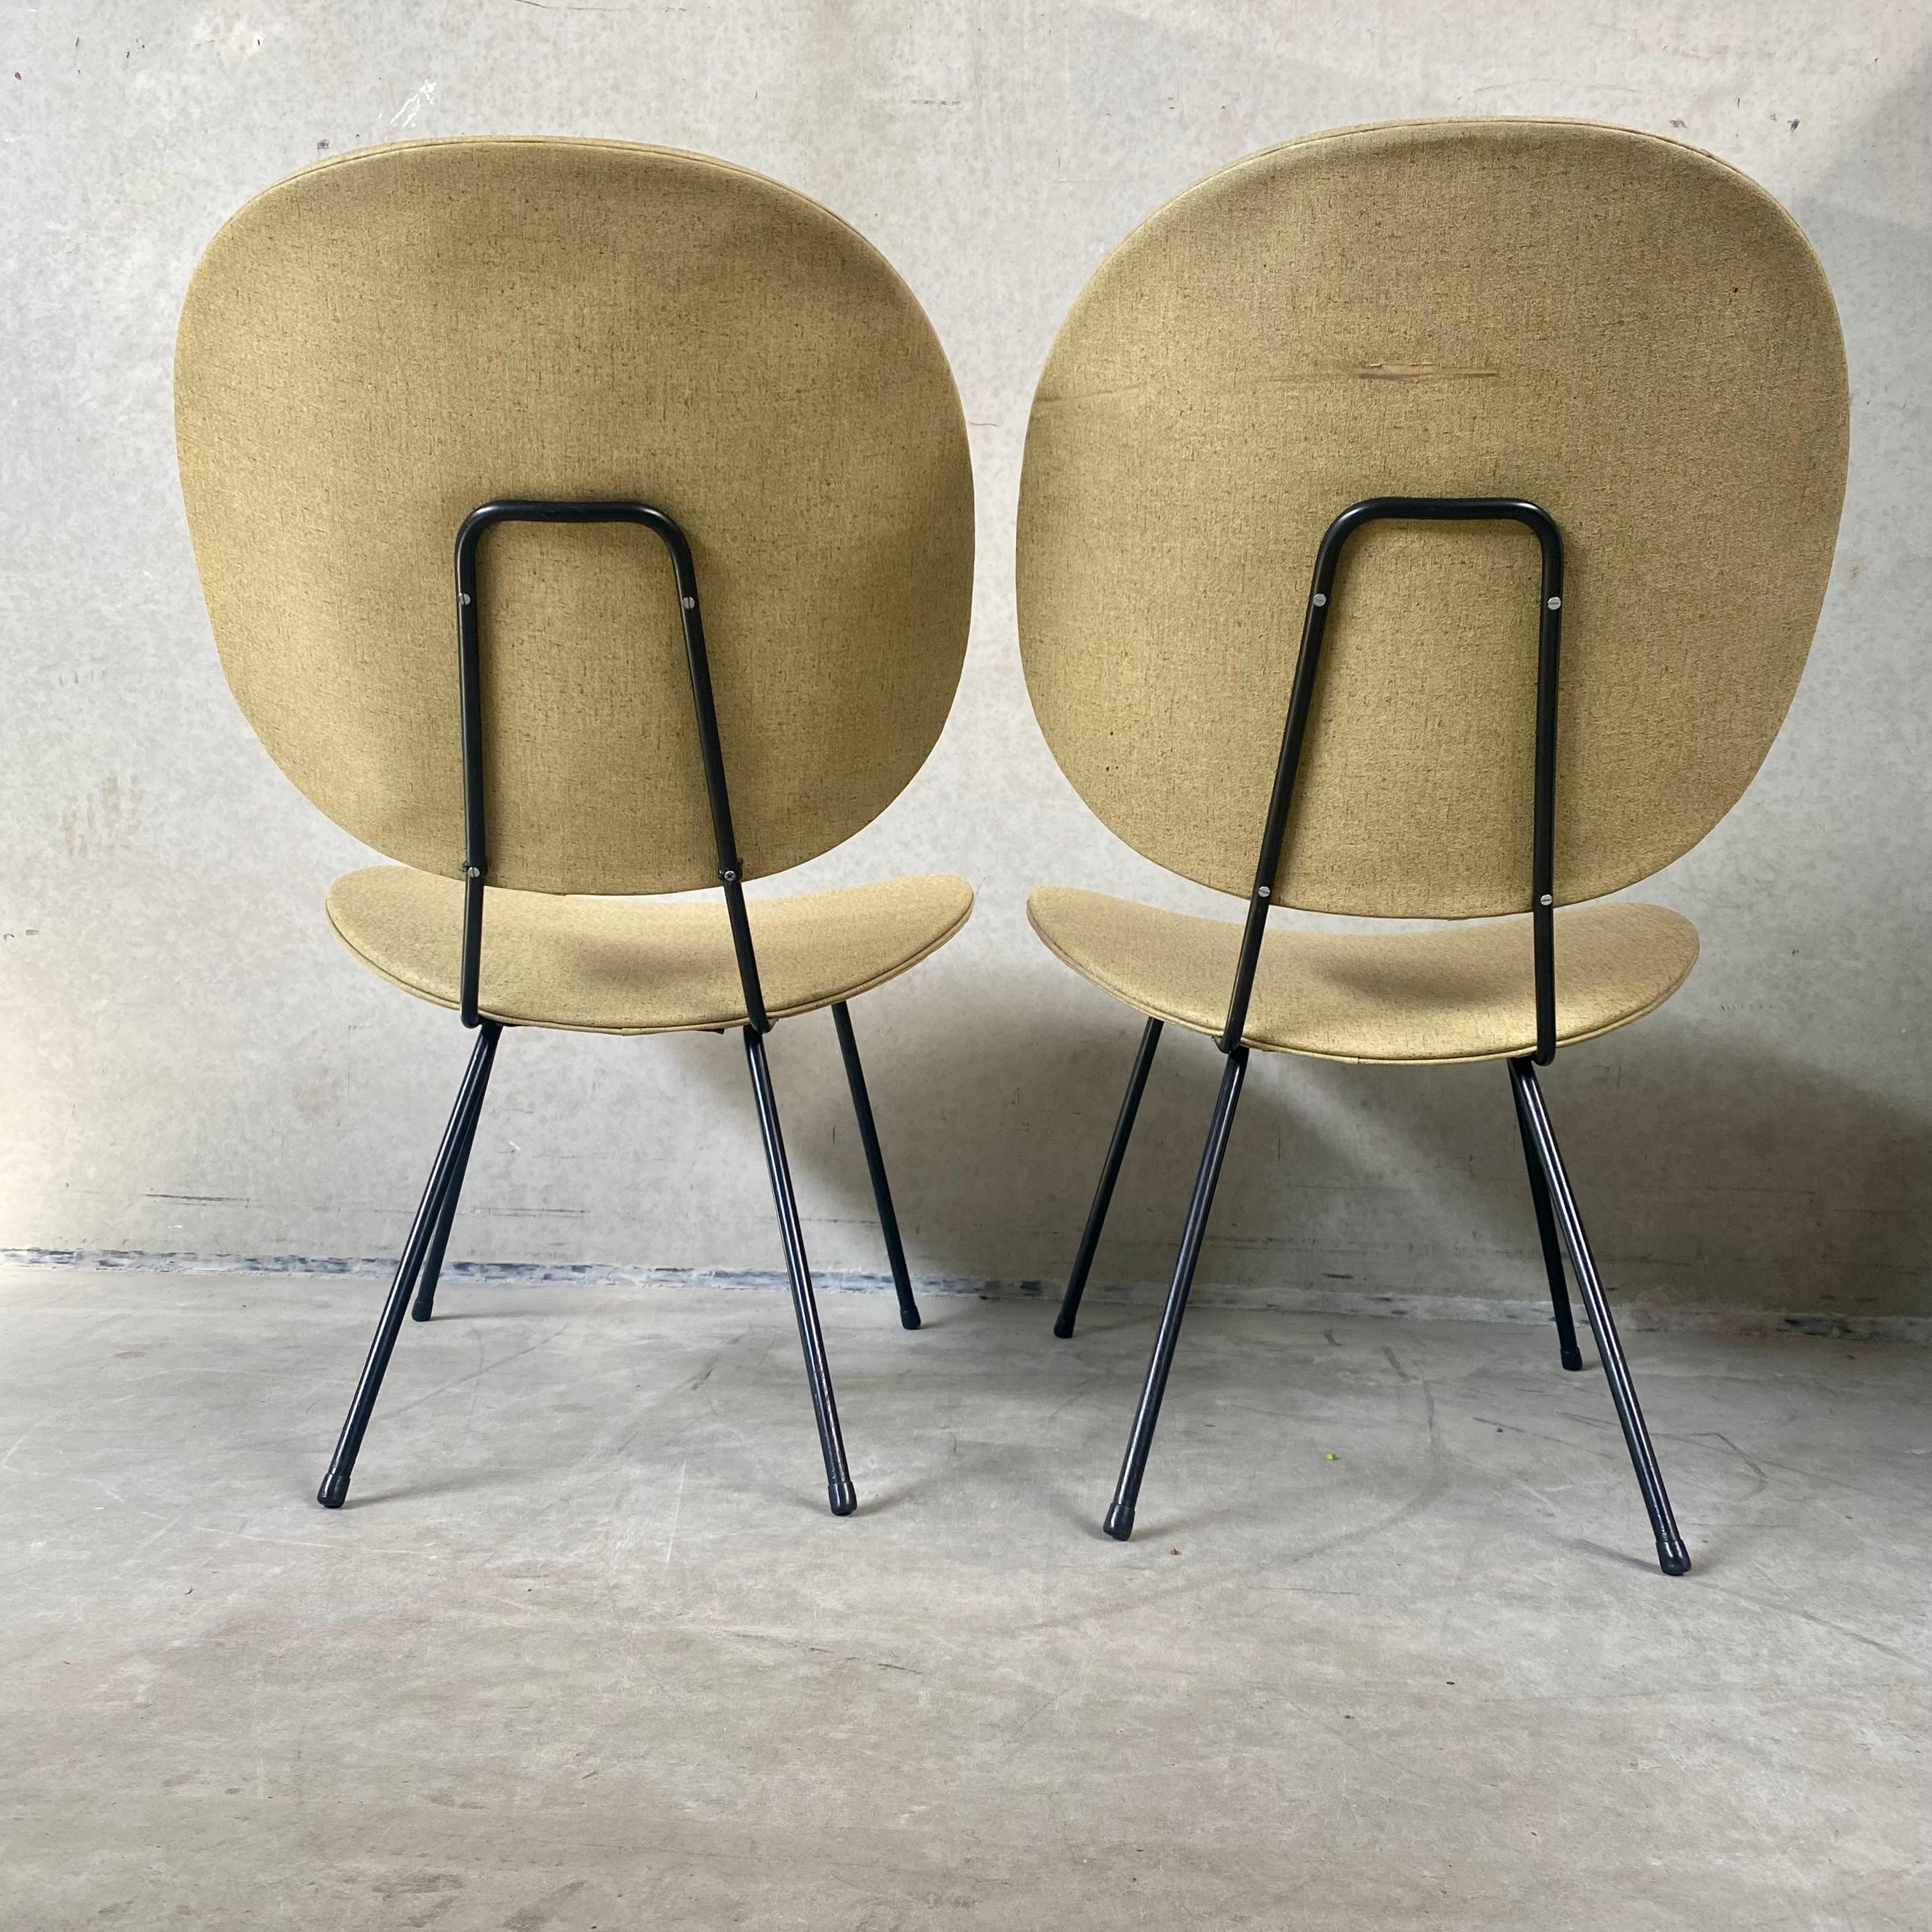 Metal Set of 2 Lounge Chairs by W.H. Gispen for Kembo, Netherlands 1950 For Sale